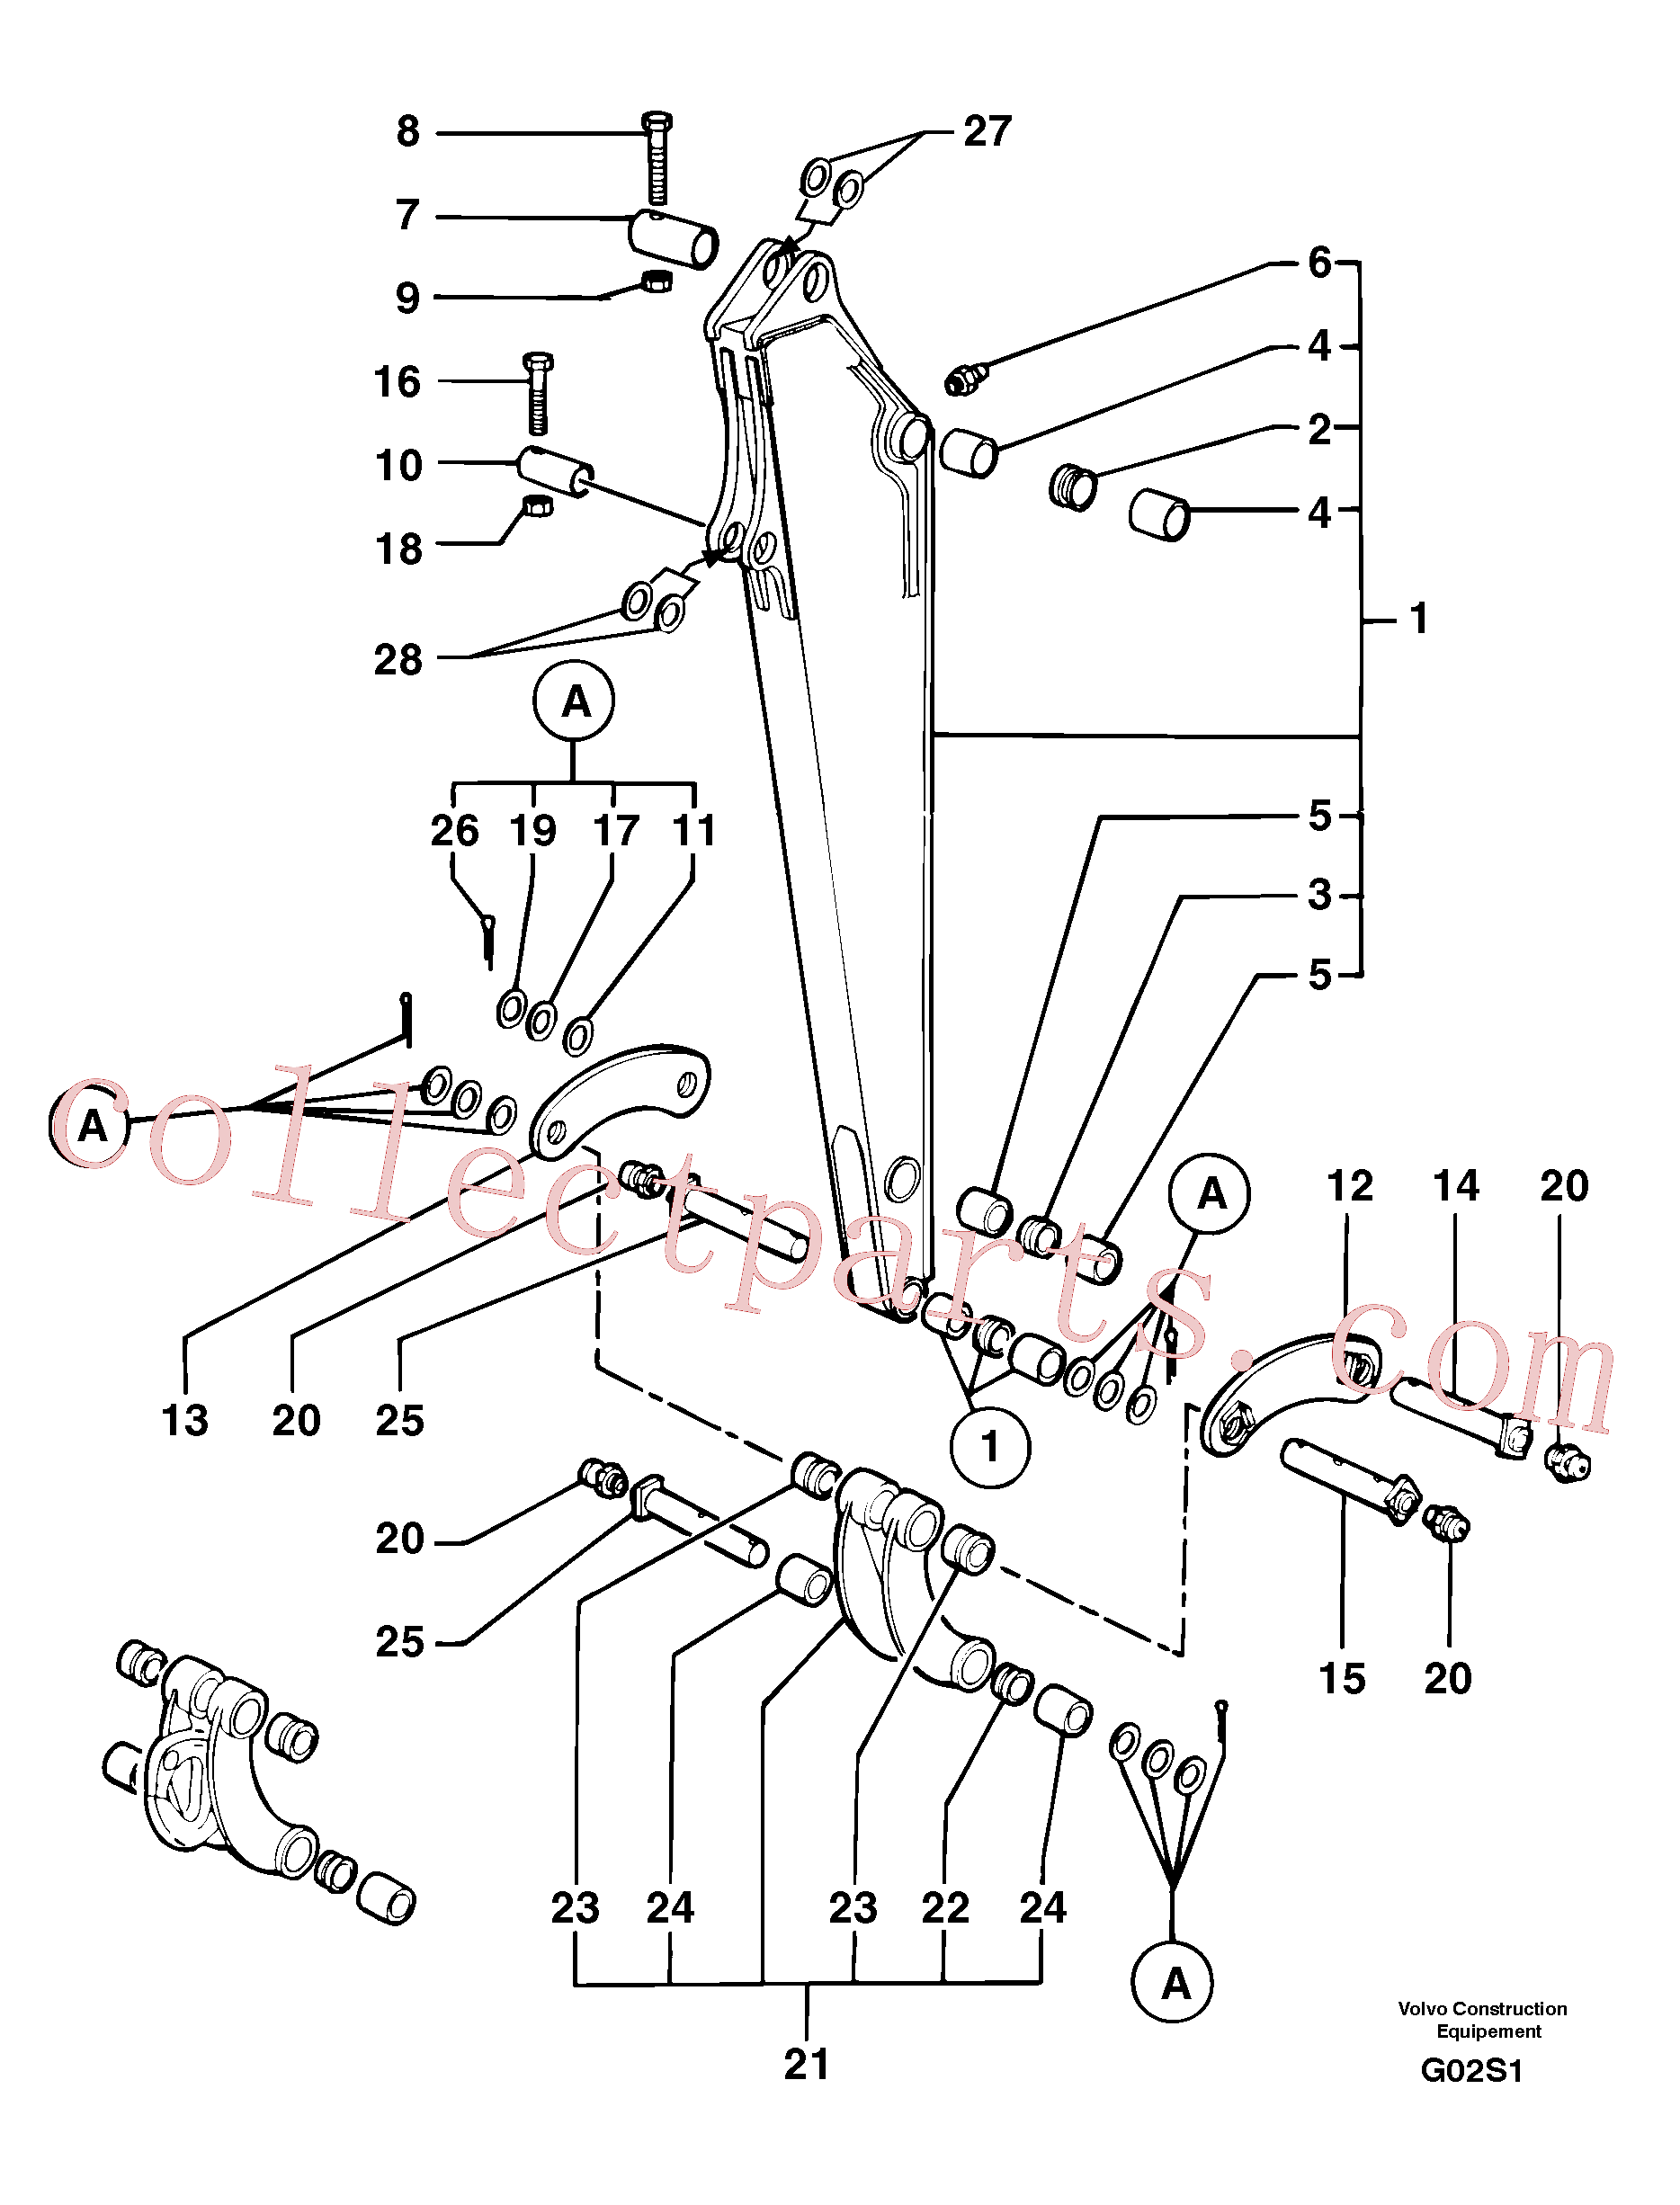 PJ5460027 for Volvo Dipper arm(G02S1 assembly)